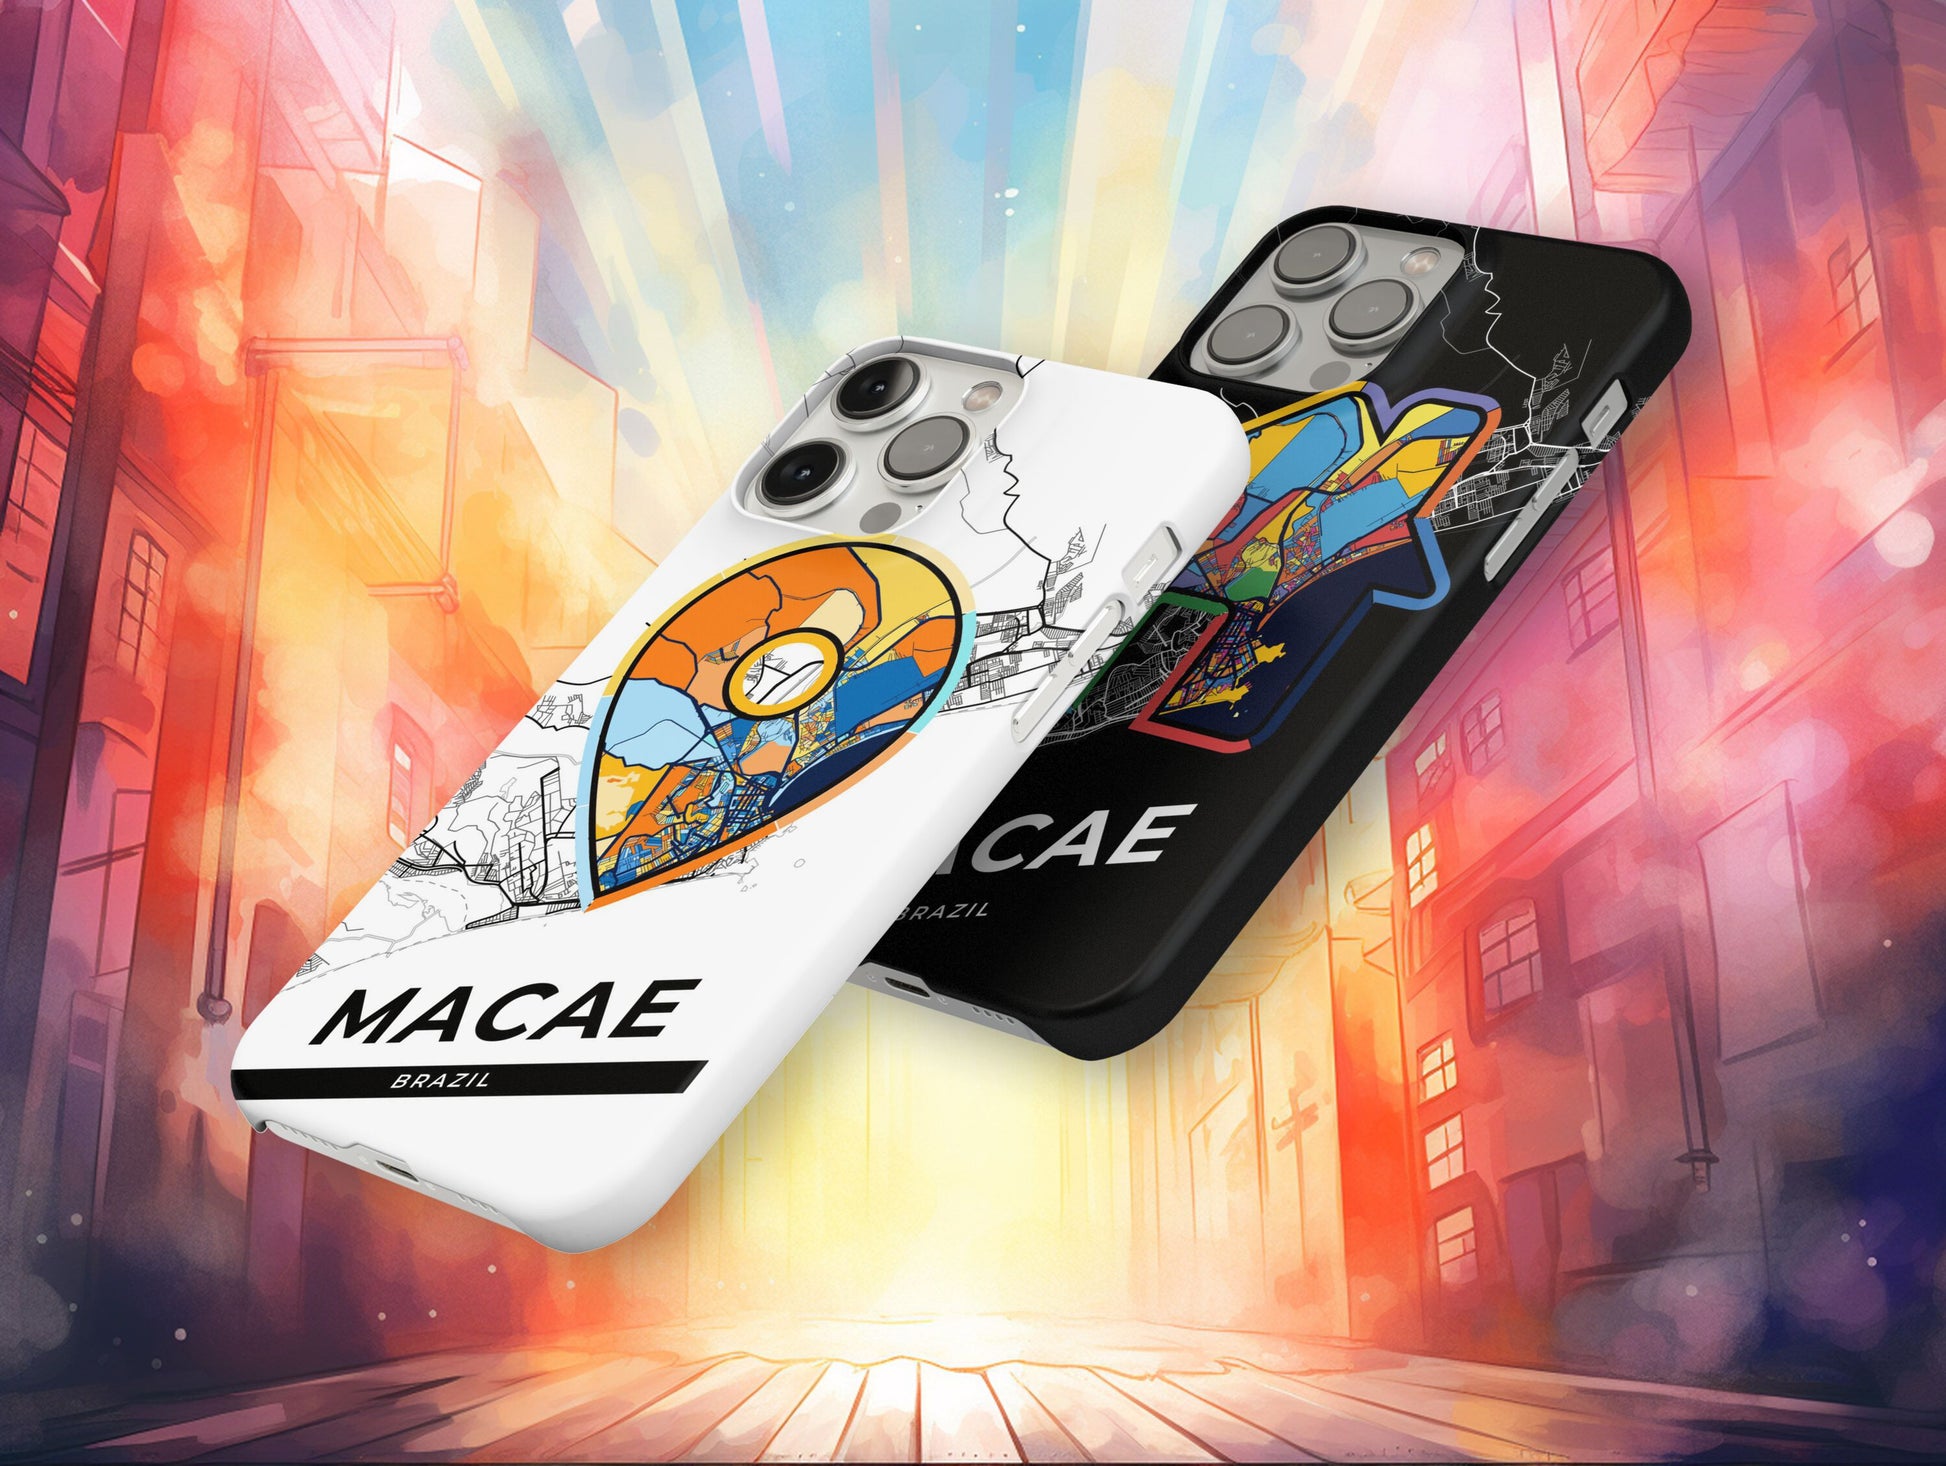 Macae Brazil slim phone case with colorful icon. Birthday, wedding or housewarming gift. Couple match cases.